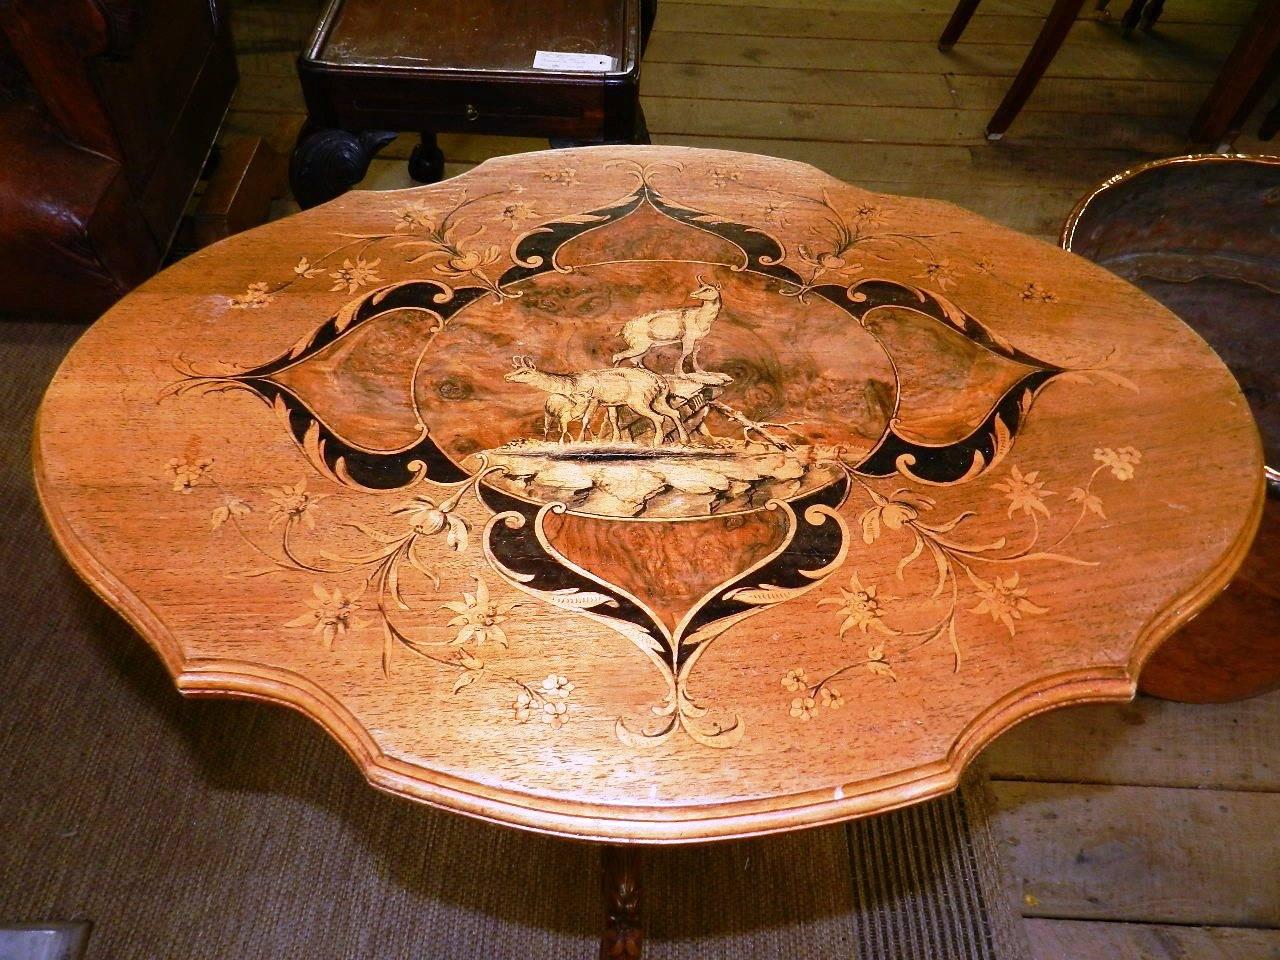 A signed antique walnut inlaid table from the Austrian Tyrol with a tilt top and carved three-legged pedestal base. The inlaid and decorated top also depicts two chamois.